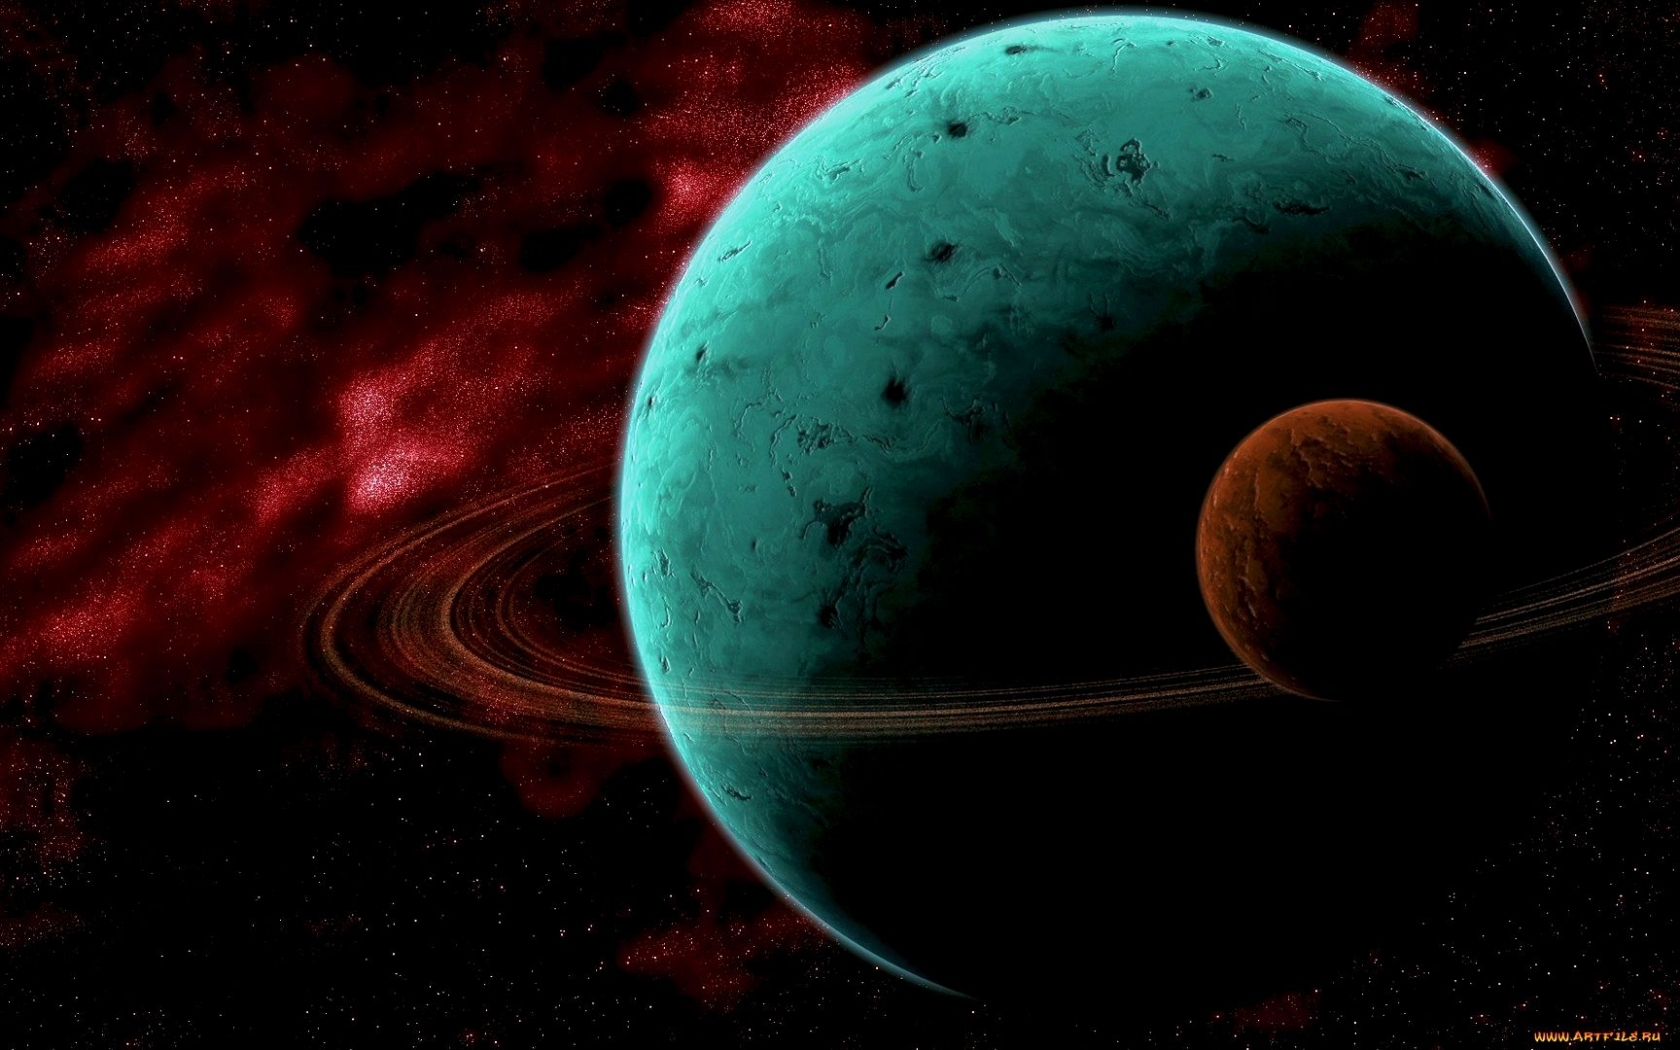 Uranus is a very weird planet. Here's why astronomers want to probe it |  RNZ News